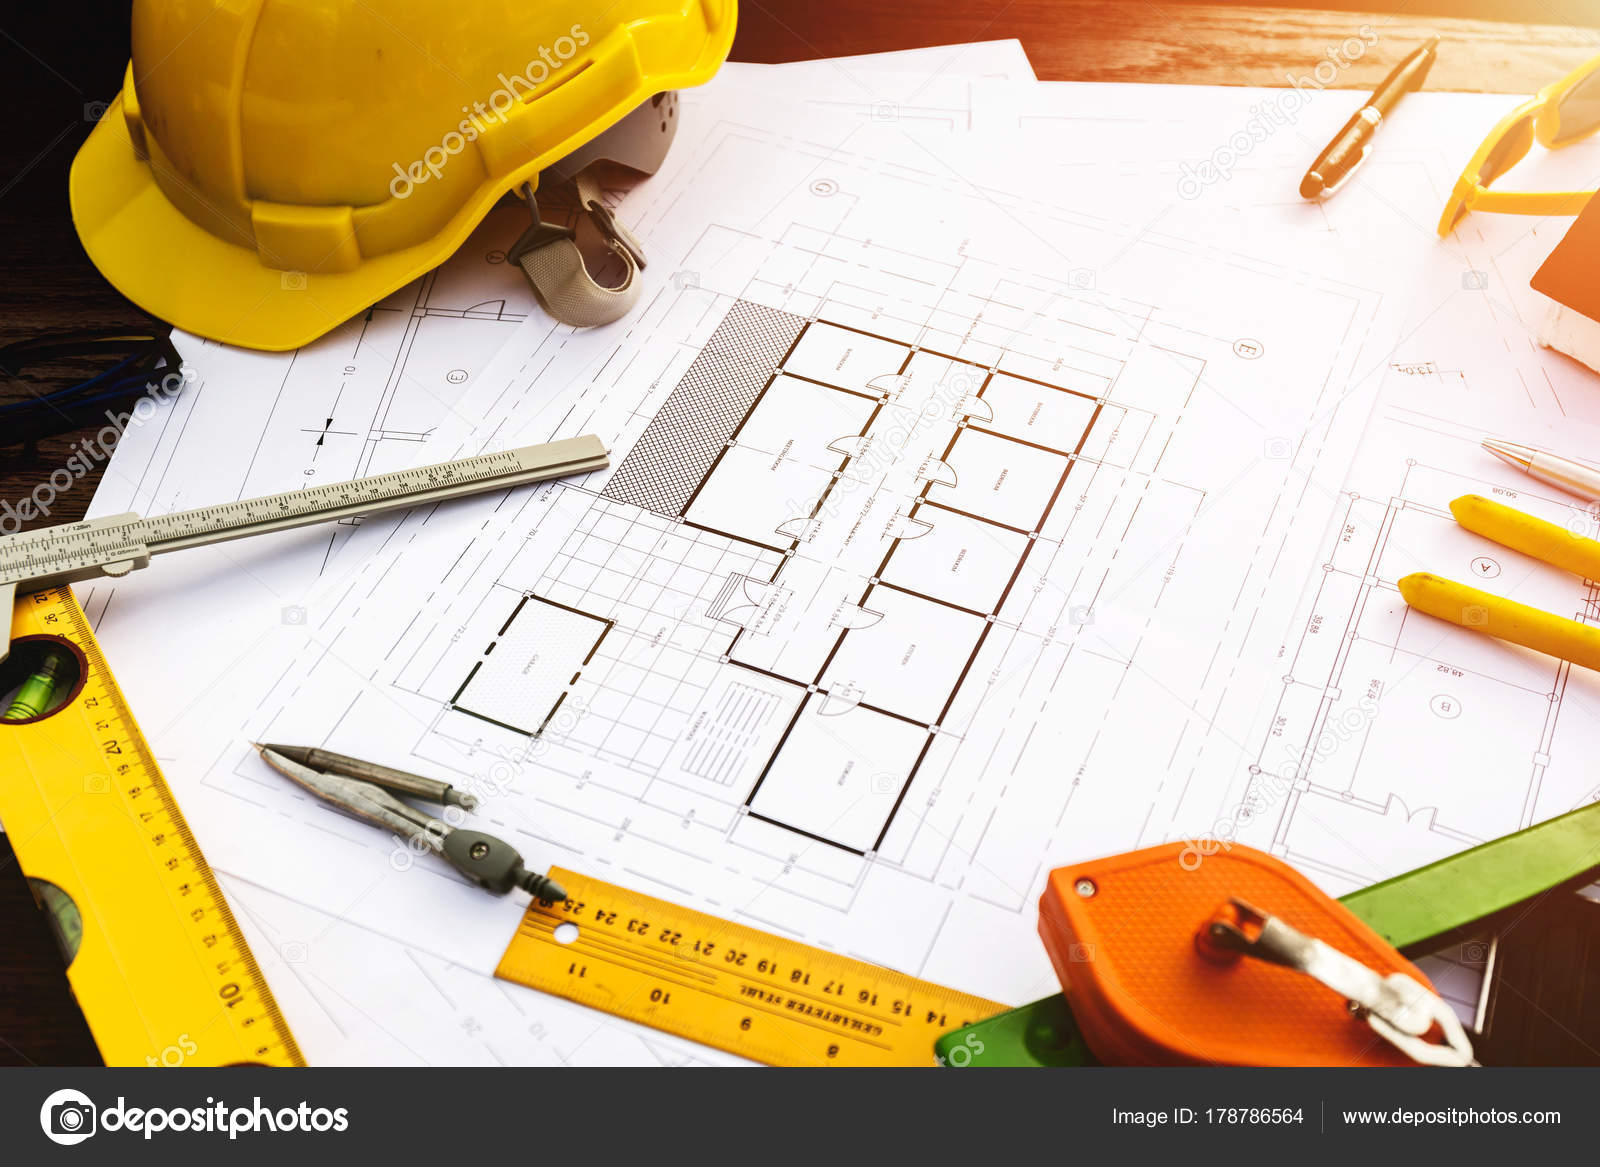 A Desk Of Contractor Engineers Who Are Going To Build A Low Cost